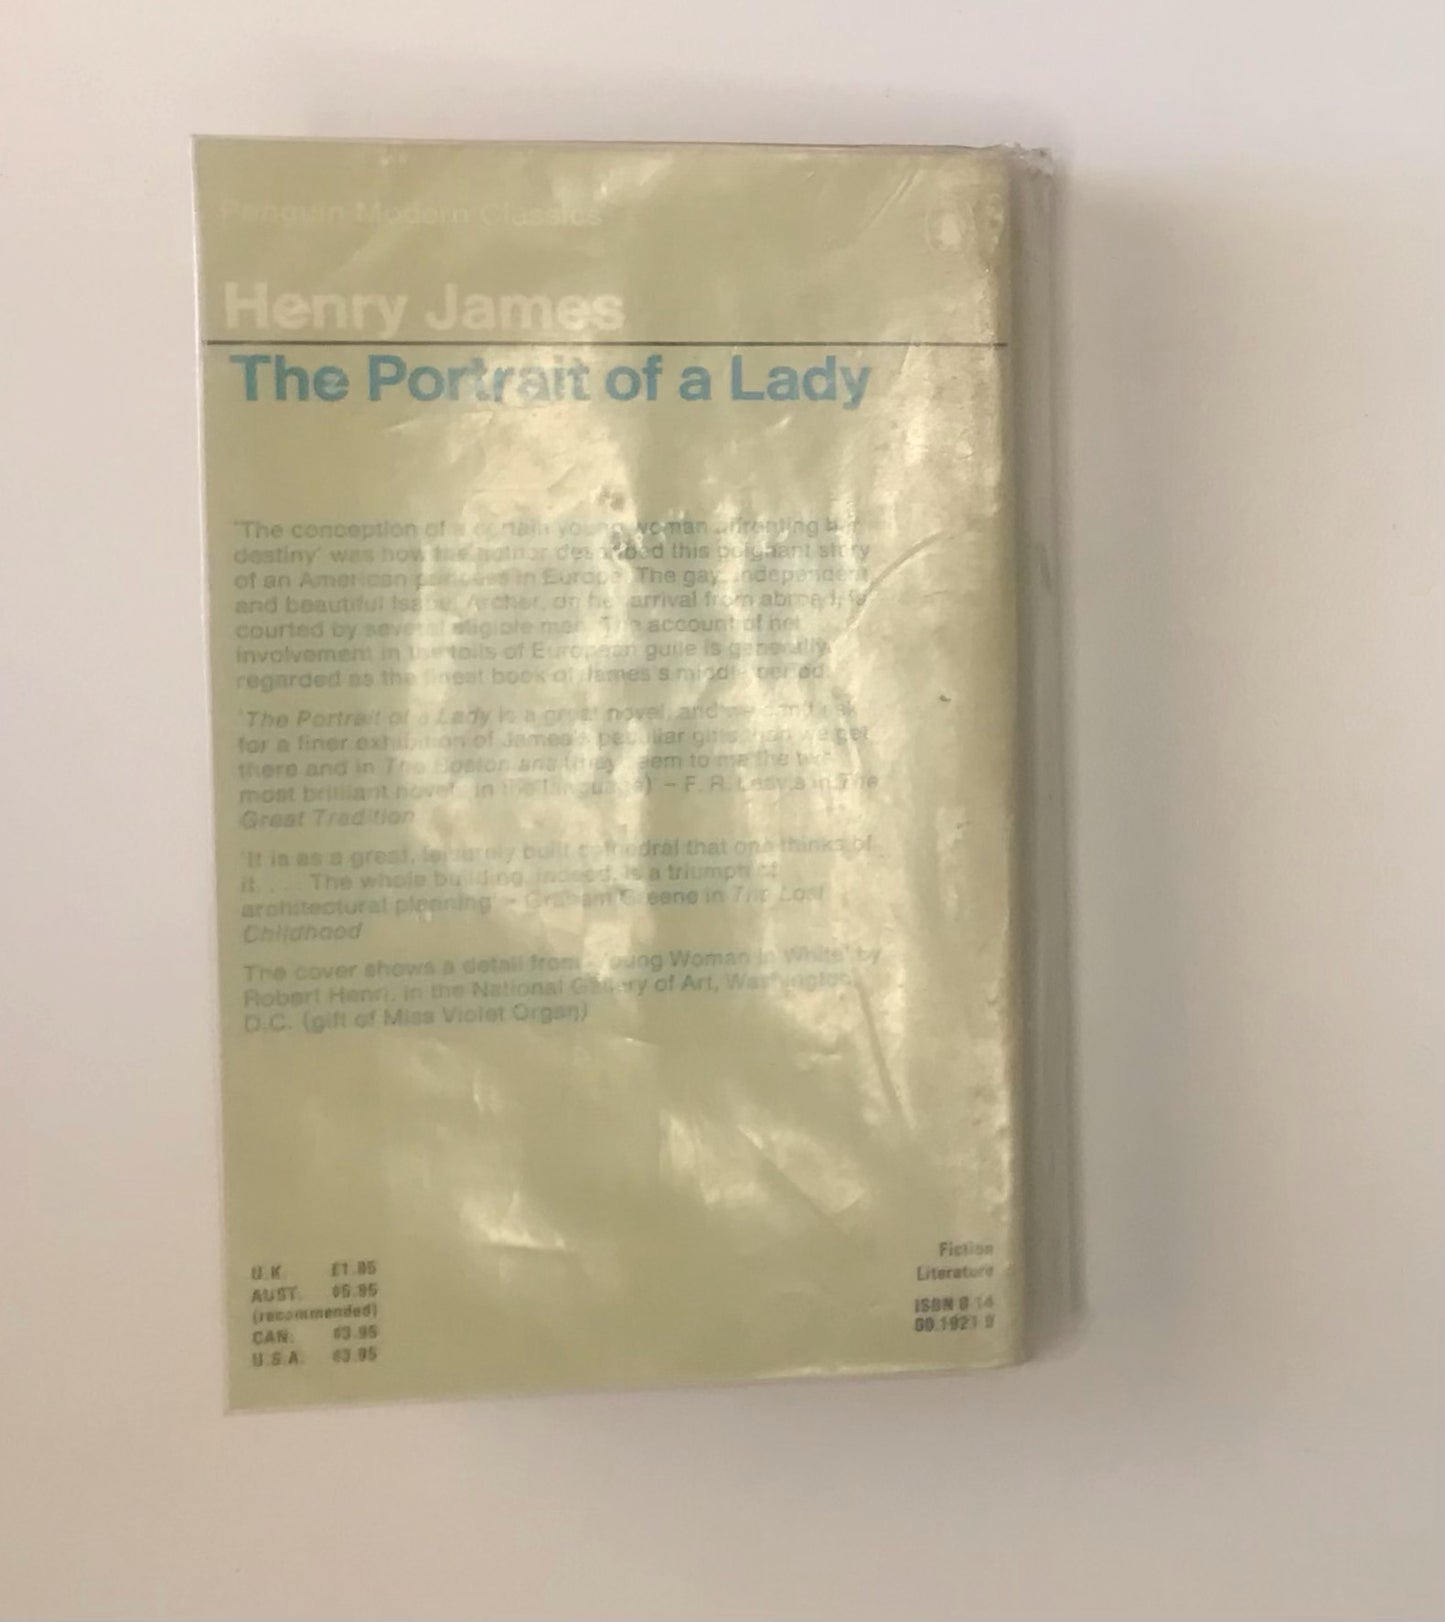 The portrait of a lady - Henry James